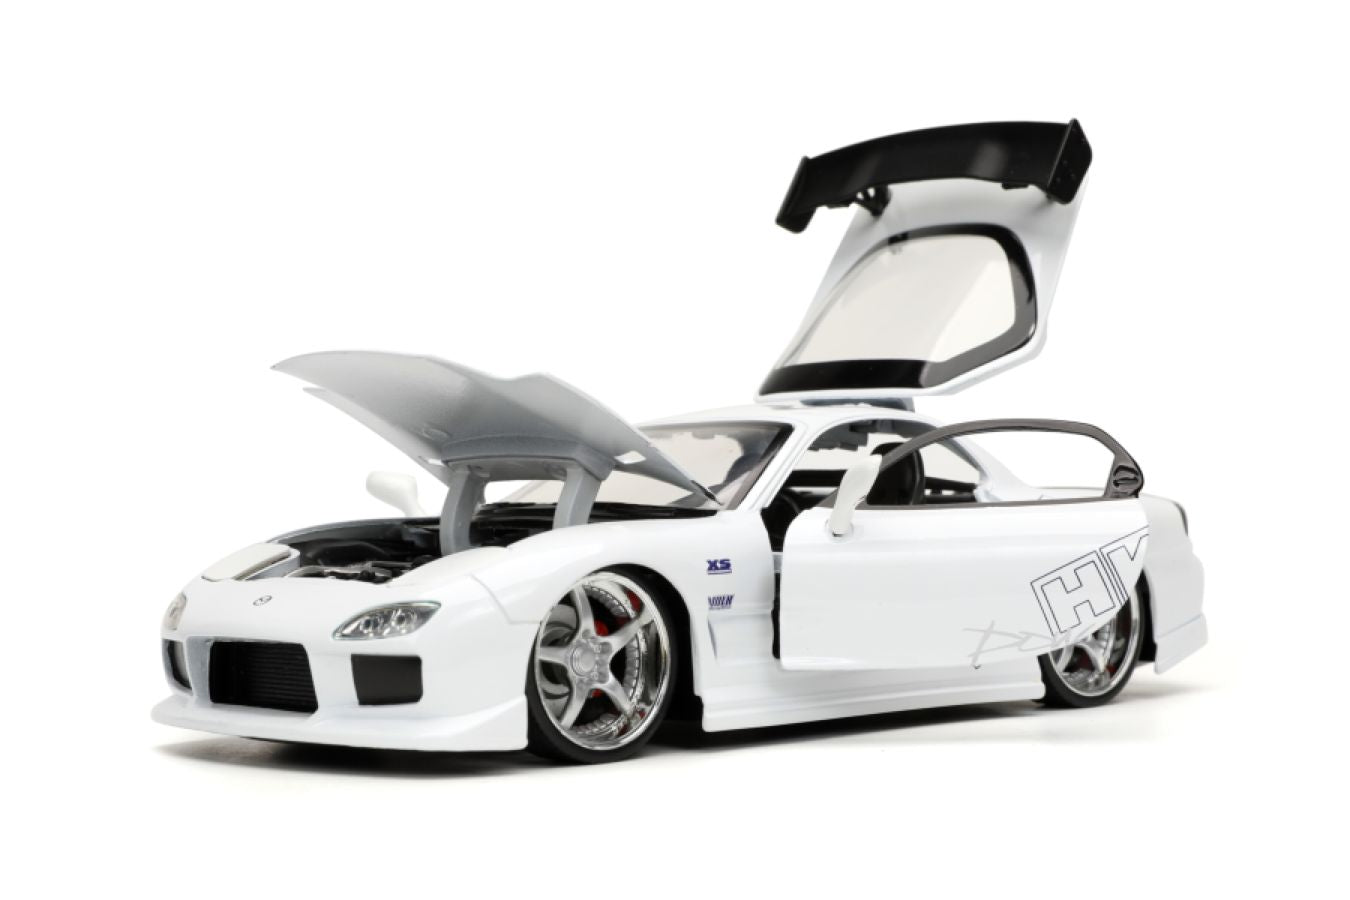 Fast and Furious - 1993 Mazda RX-7 FD3S-Wide 1:24 Scale Hollywood Ride